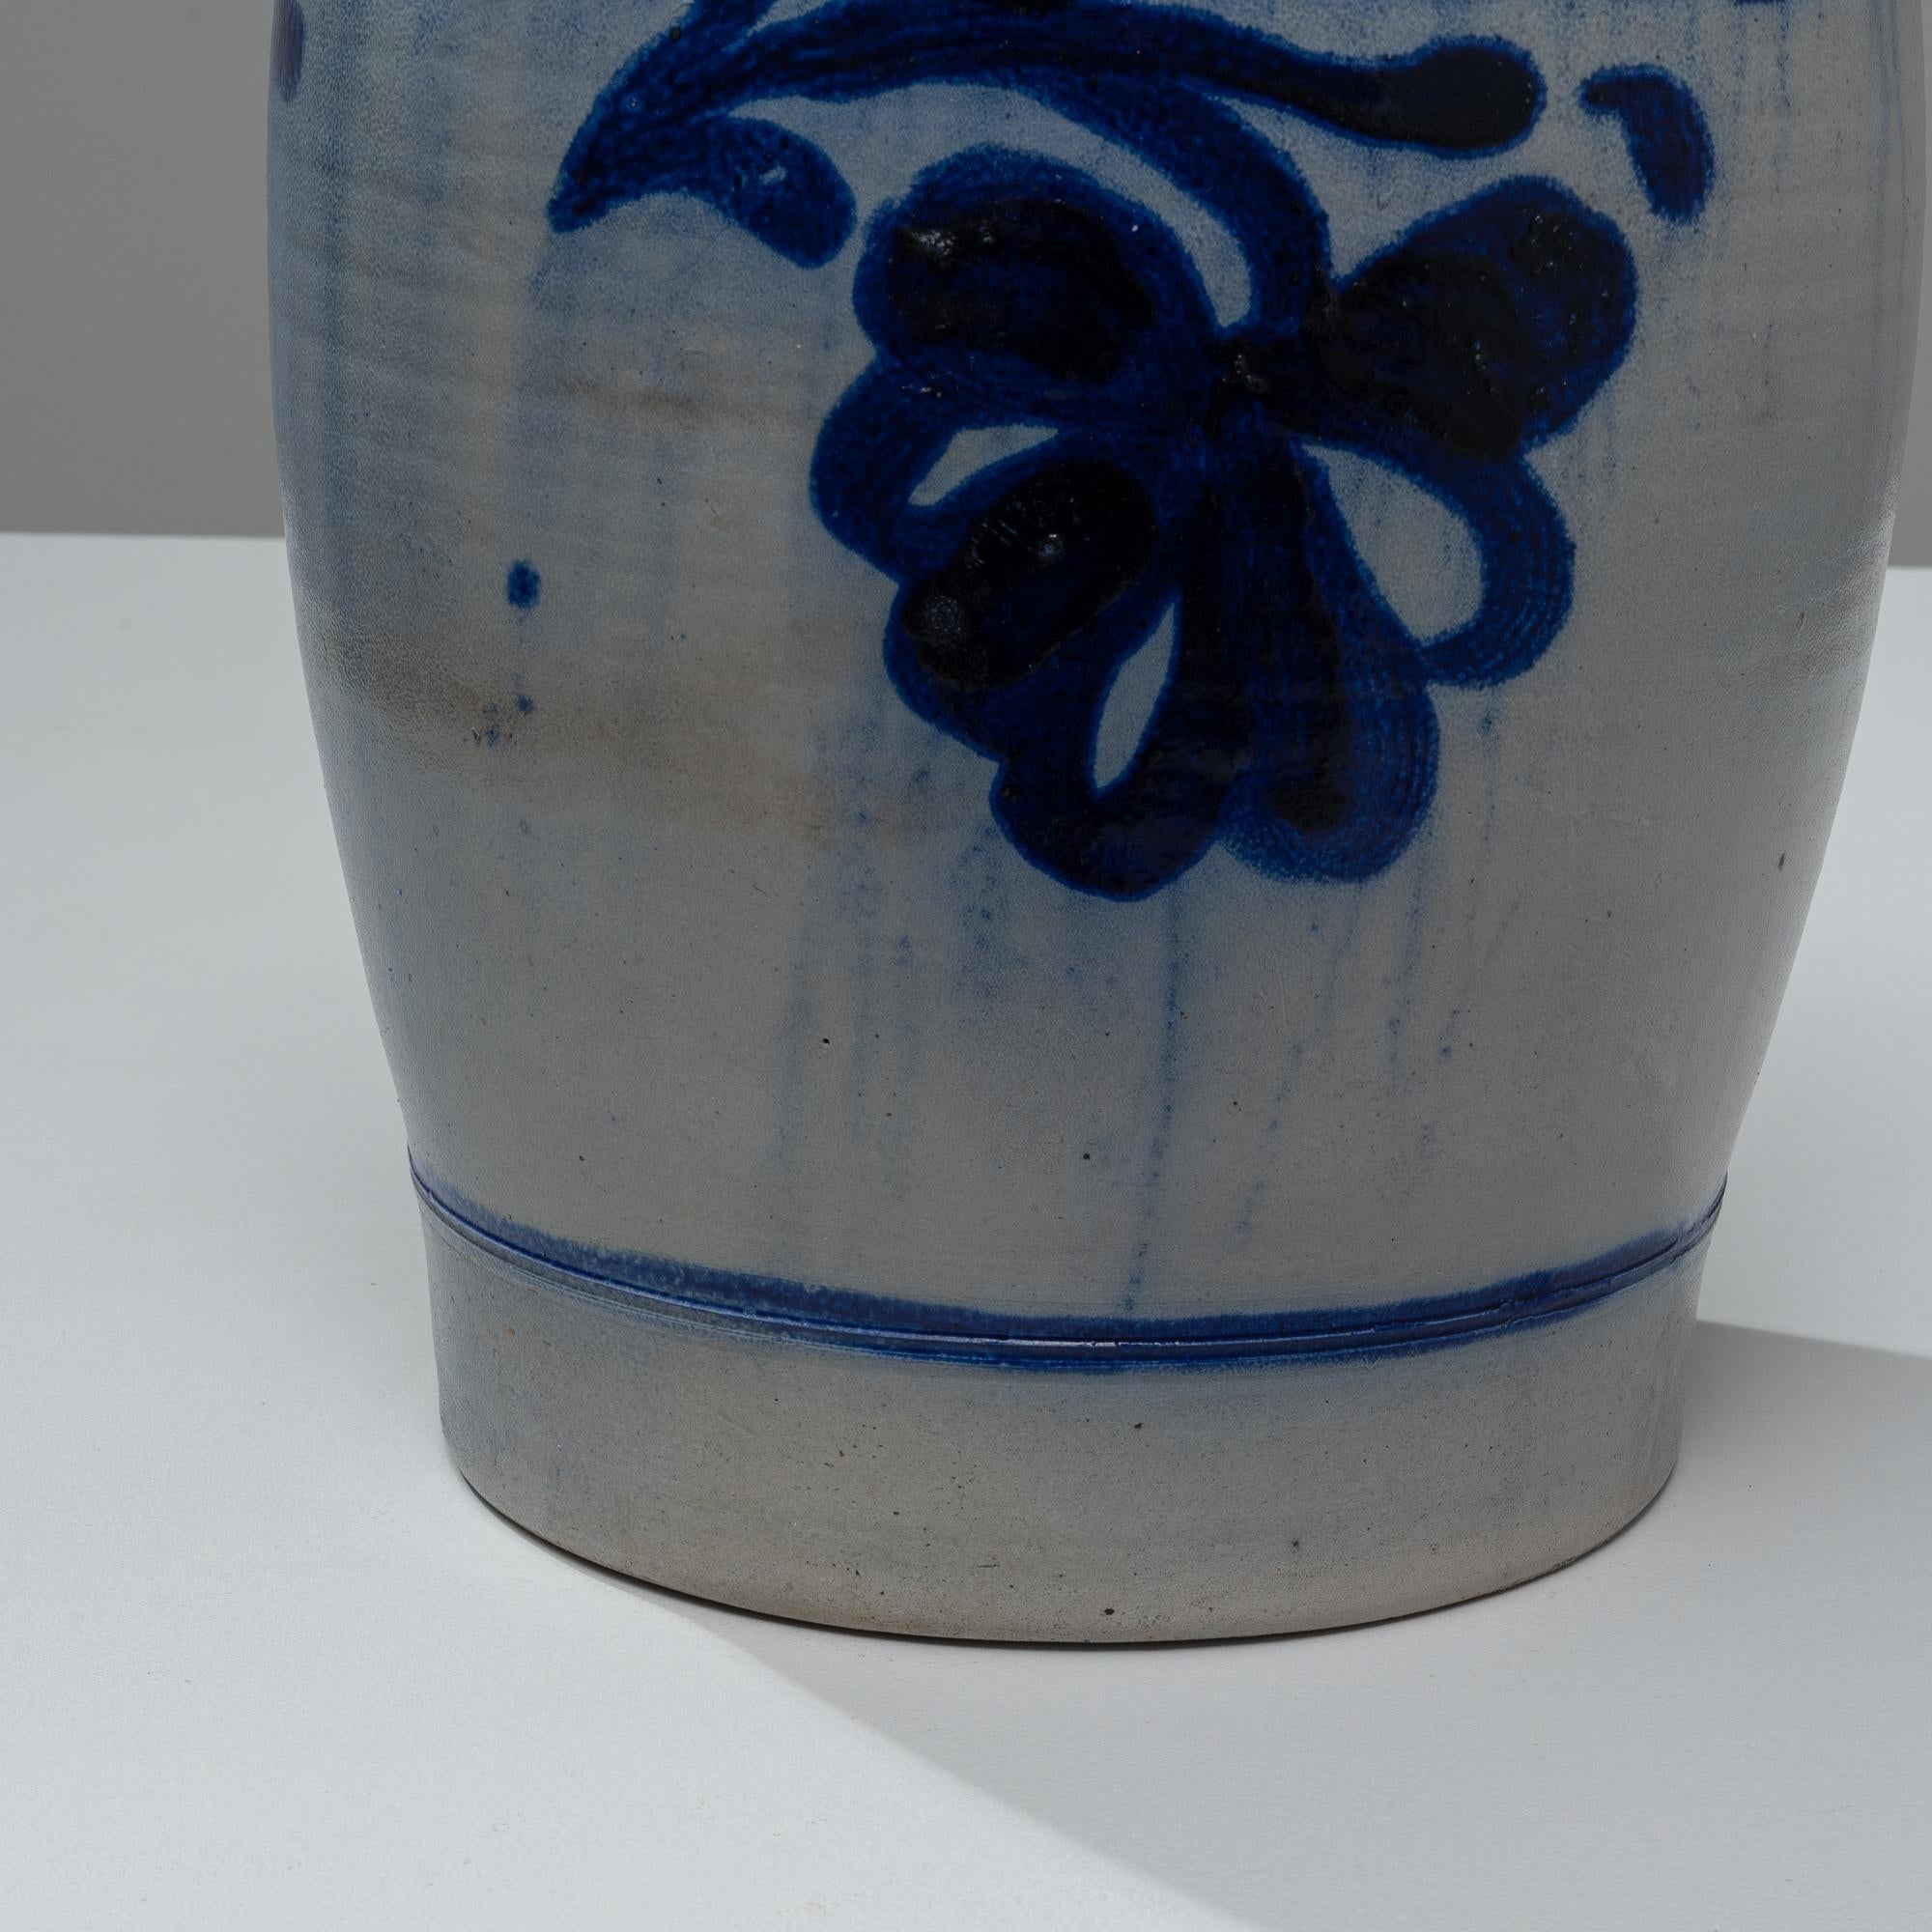 This early 1900s Belgian Ceramic Pot is a masterpiece of rustic elegance and vintage charm, ideal for those who appreciate the beauty of handcrafted artistry. The pot features a robust, rounded body adorned with intricate blue floral motifs that